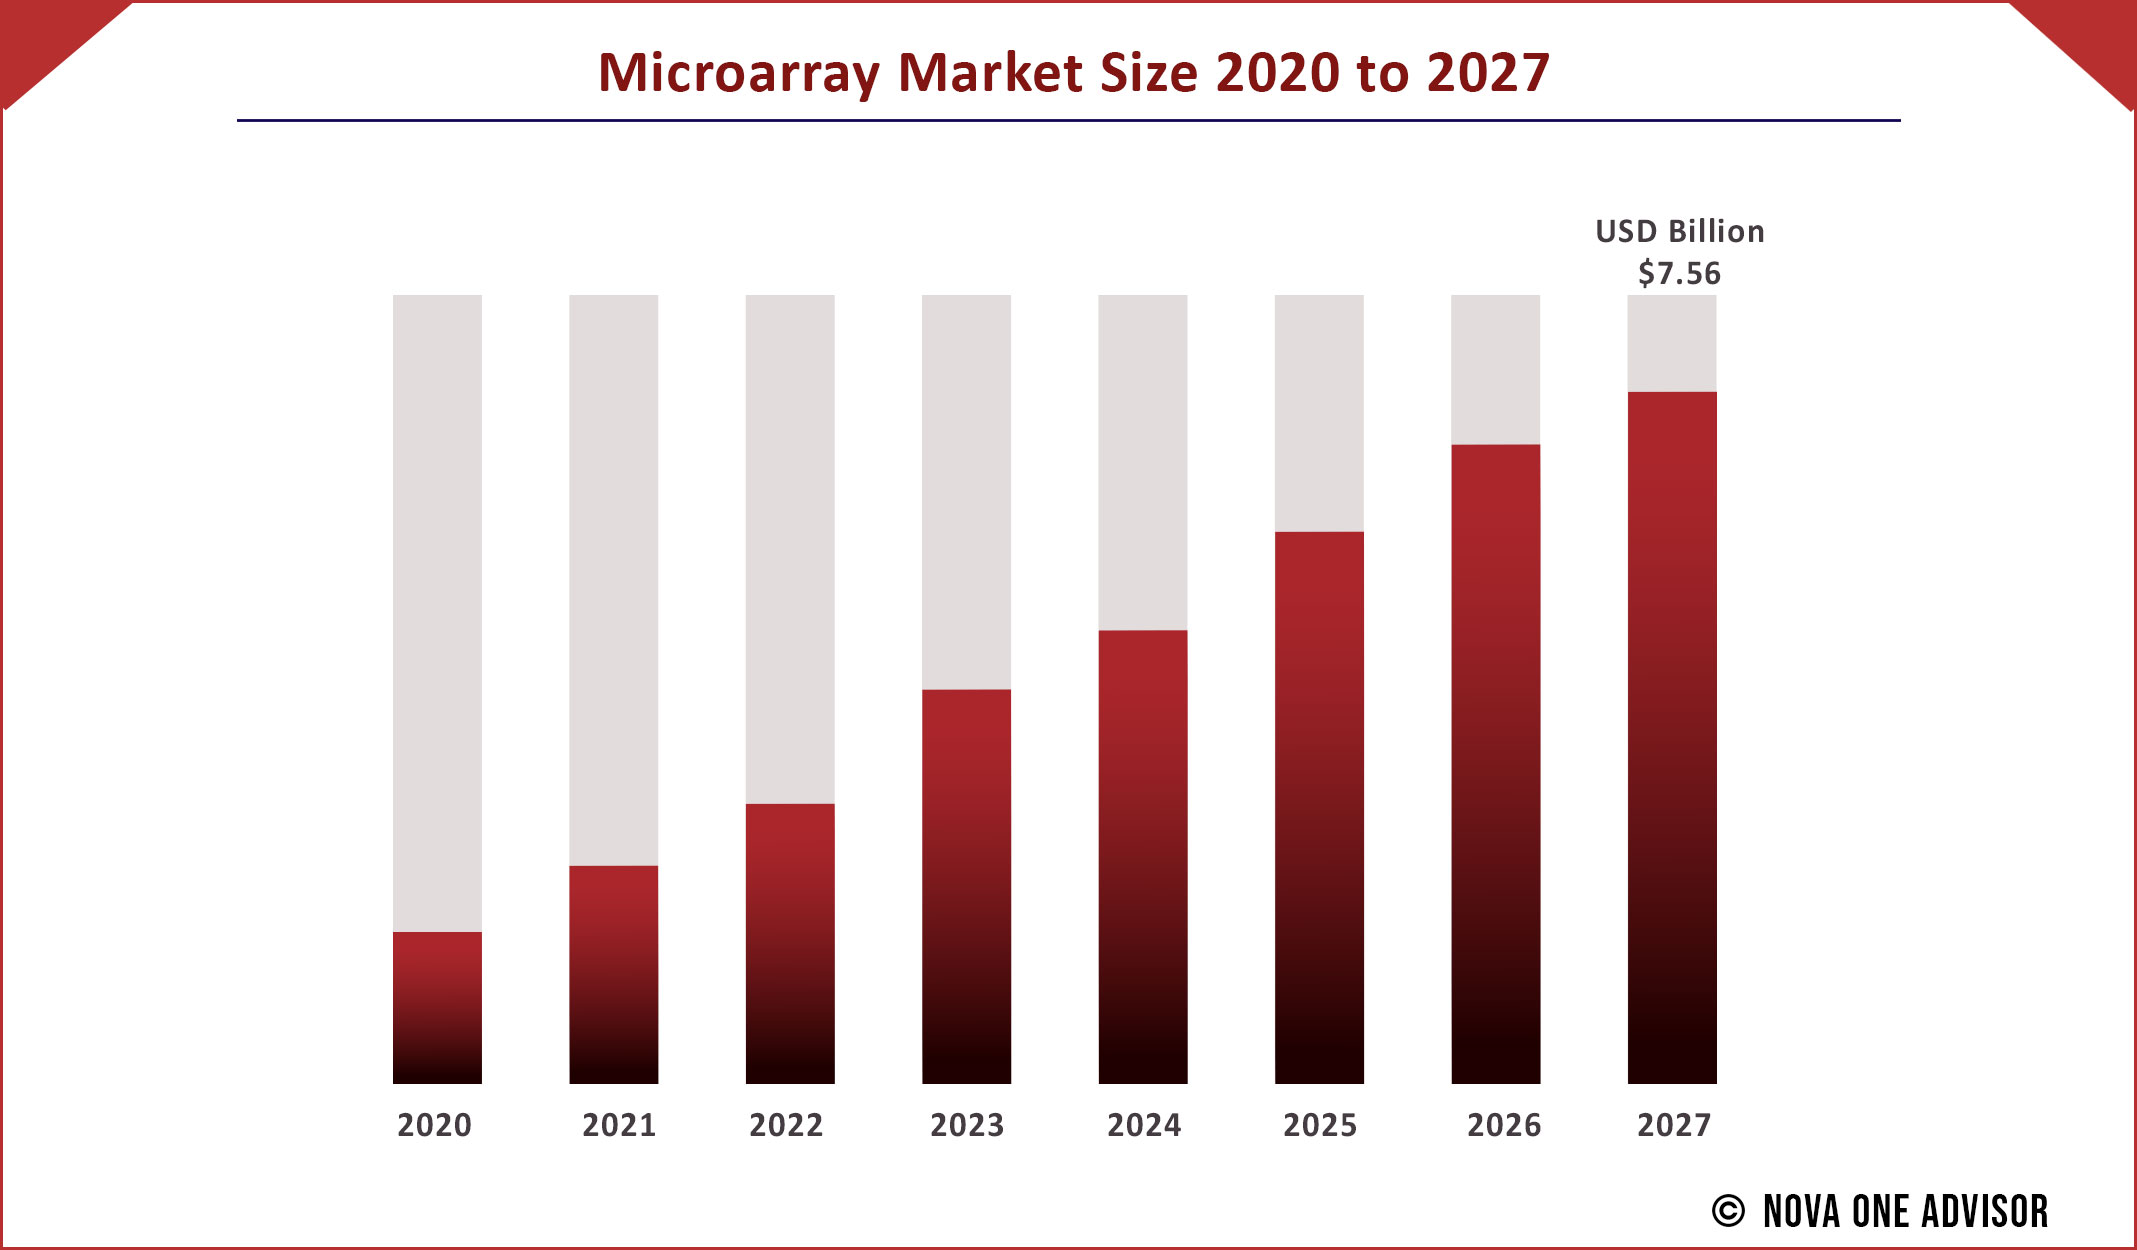 Microarray Market Size 2020 to 2027